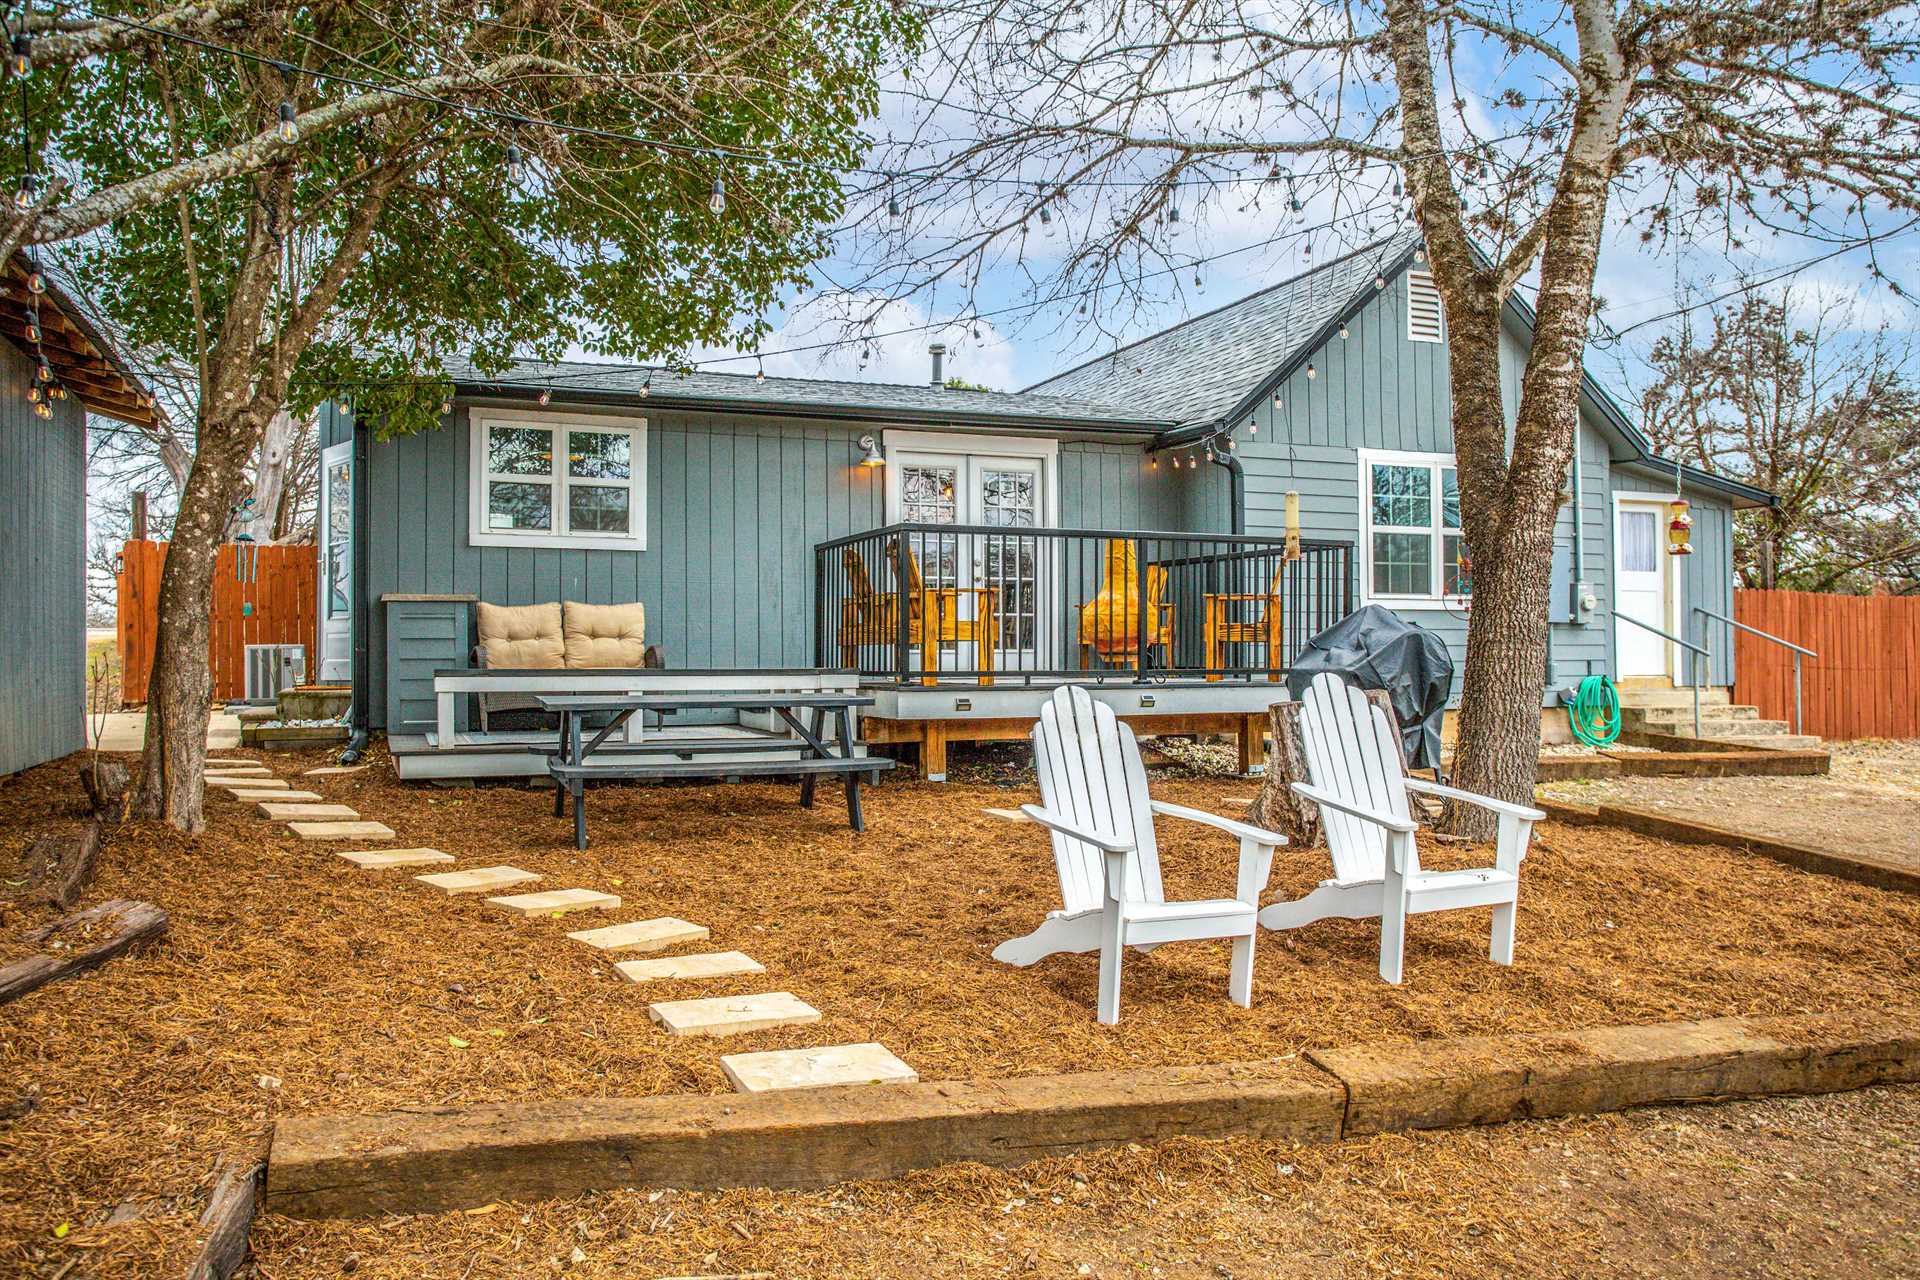                                                 With a cool blue exterior that matches the Hill Country sky, the Heavenly Hideaway on the Medina welcomes you to your peaceful escape!